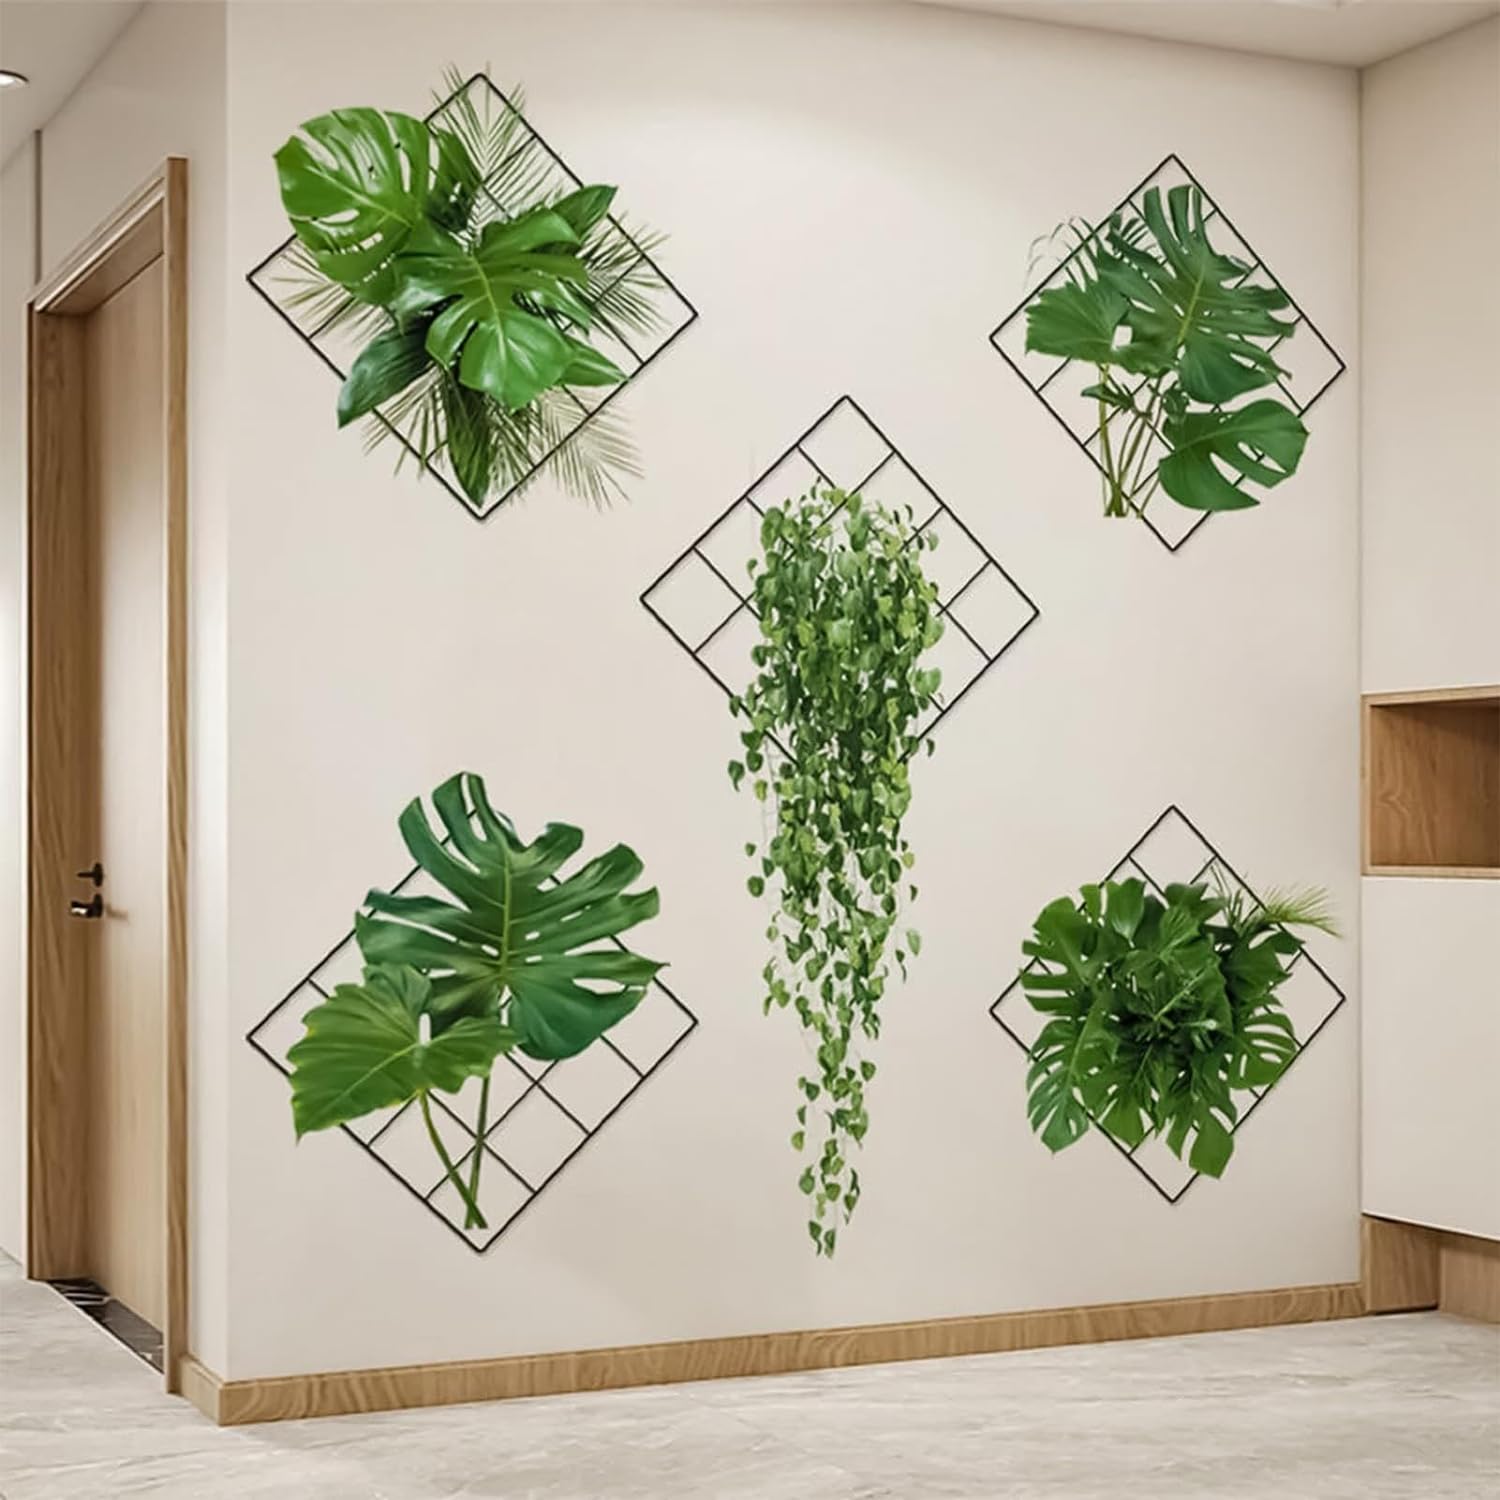 3 wall decals effect 3D tropical plants